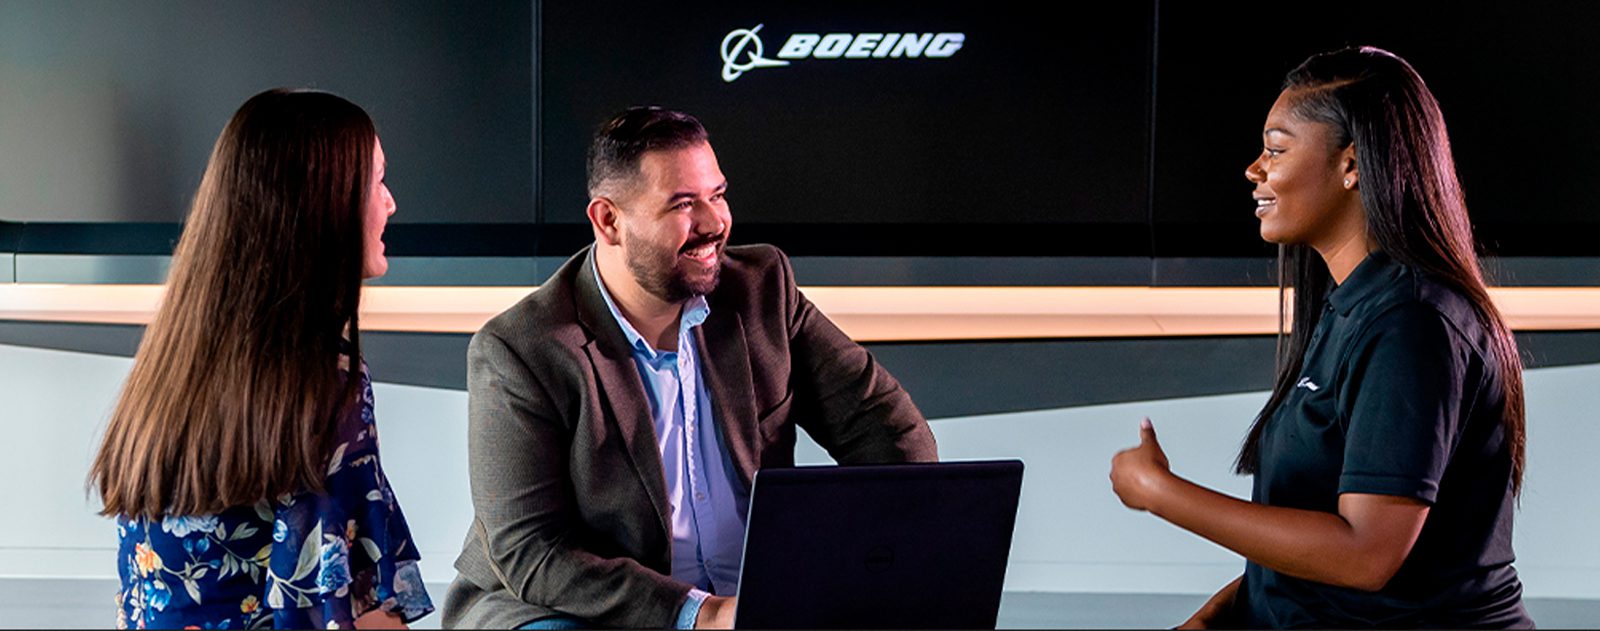 Boeing Expands Strategic Investments in Brazil, including New Engineering and Technology Center